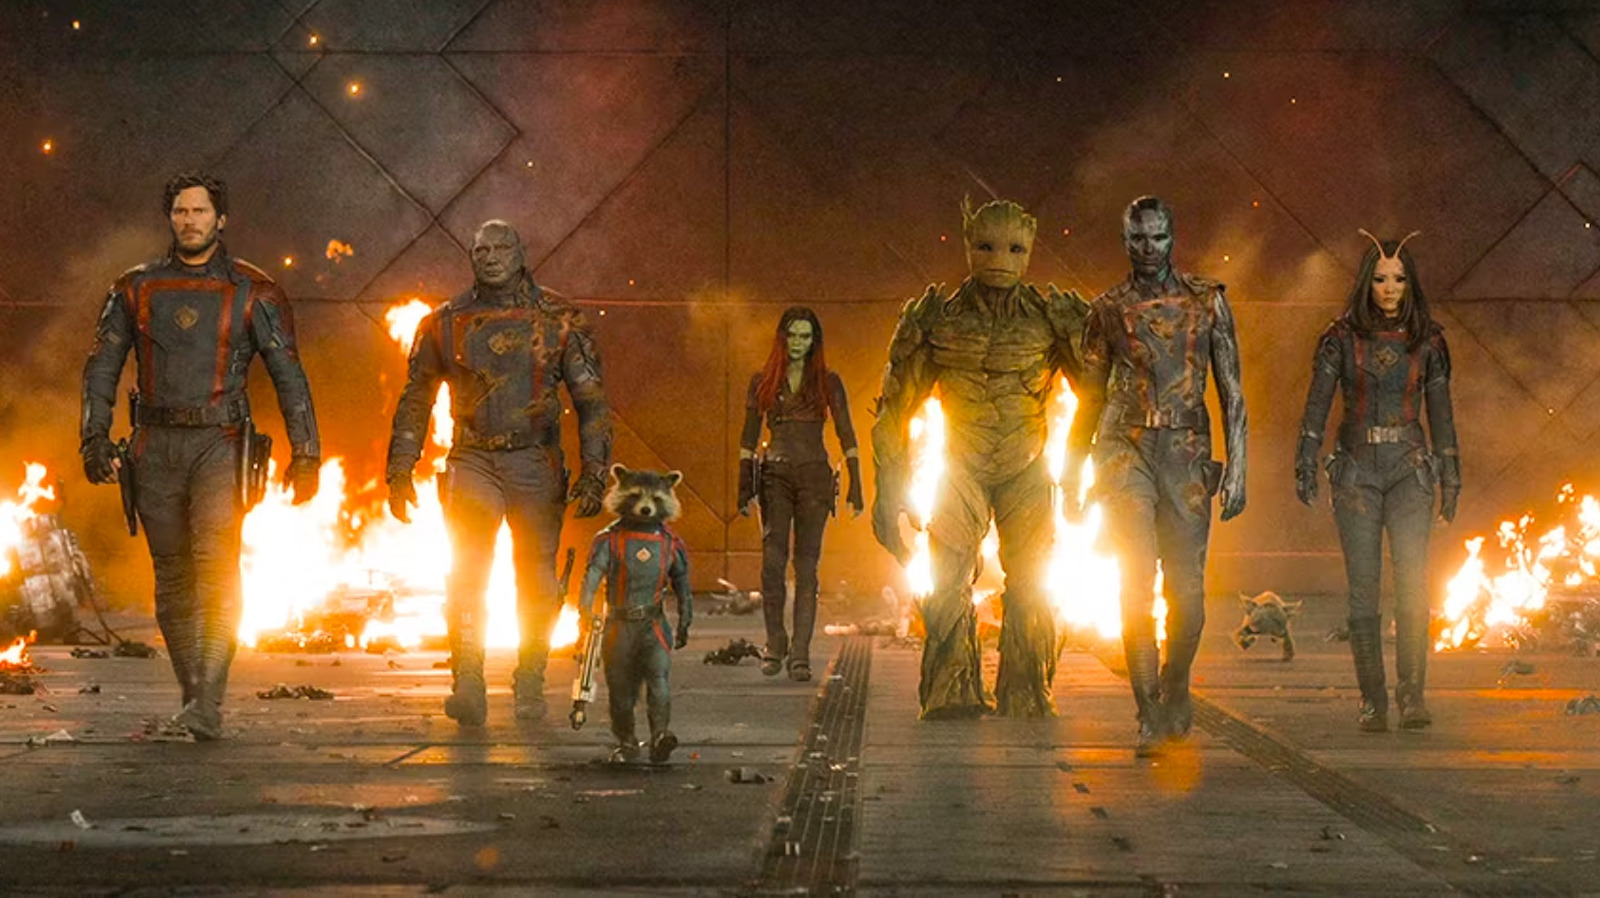 https://www.slashfilm.com/img/gallery/guardians-of-the-galaxy-vol-3-review-a-rushed-uneven-but-frequently-emotional-end-to-the-trilogy/l-intro-1682681252.jpg